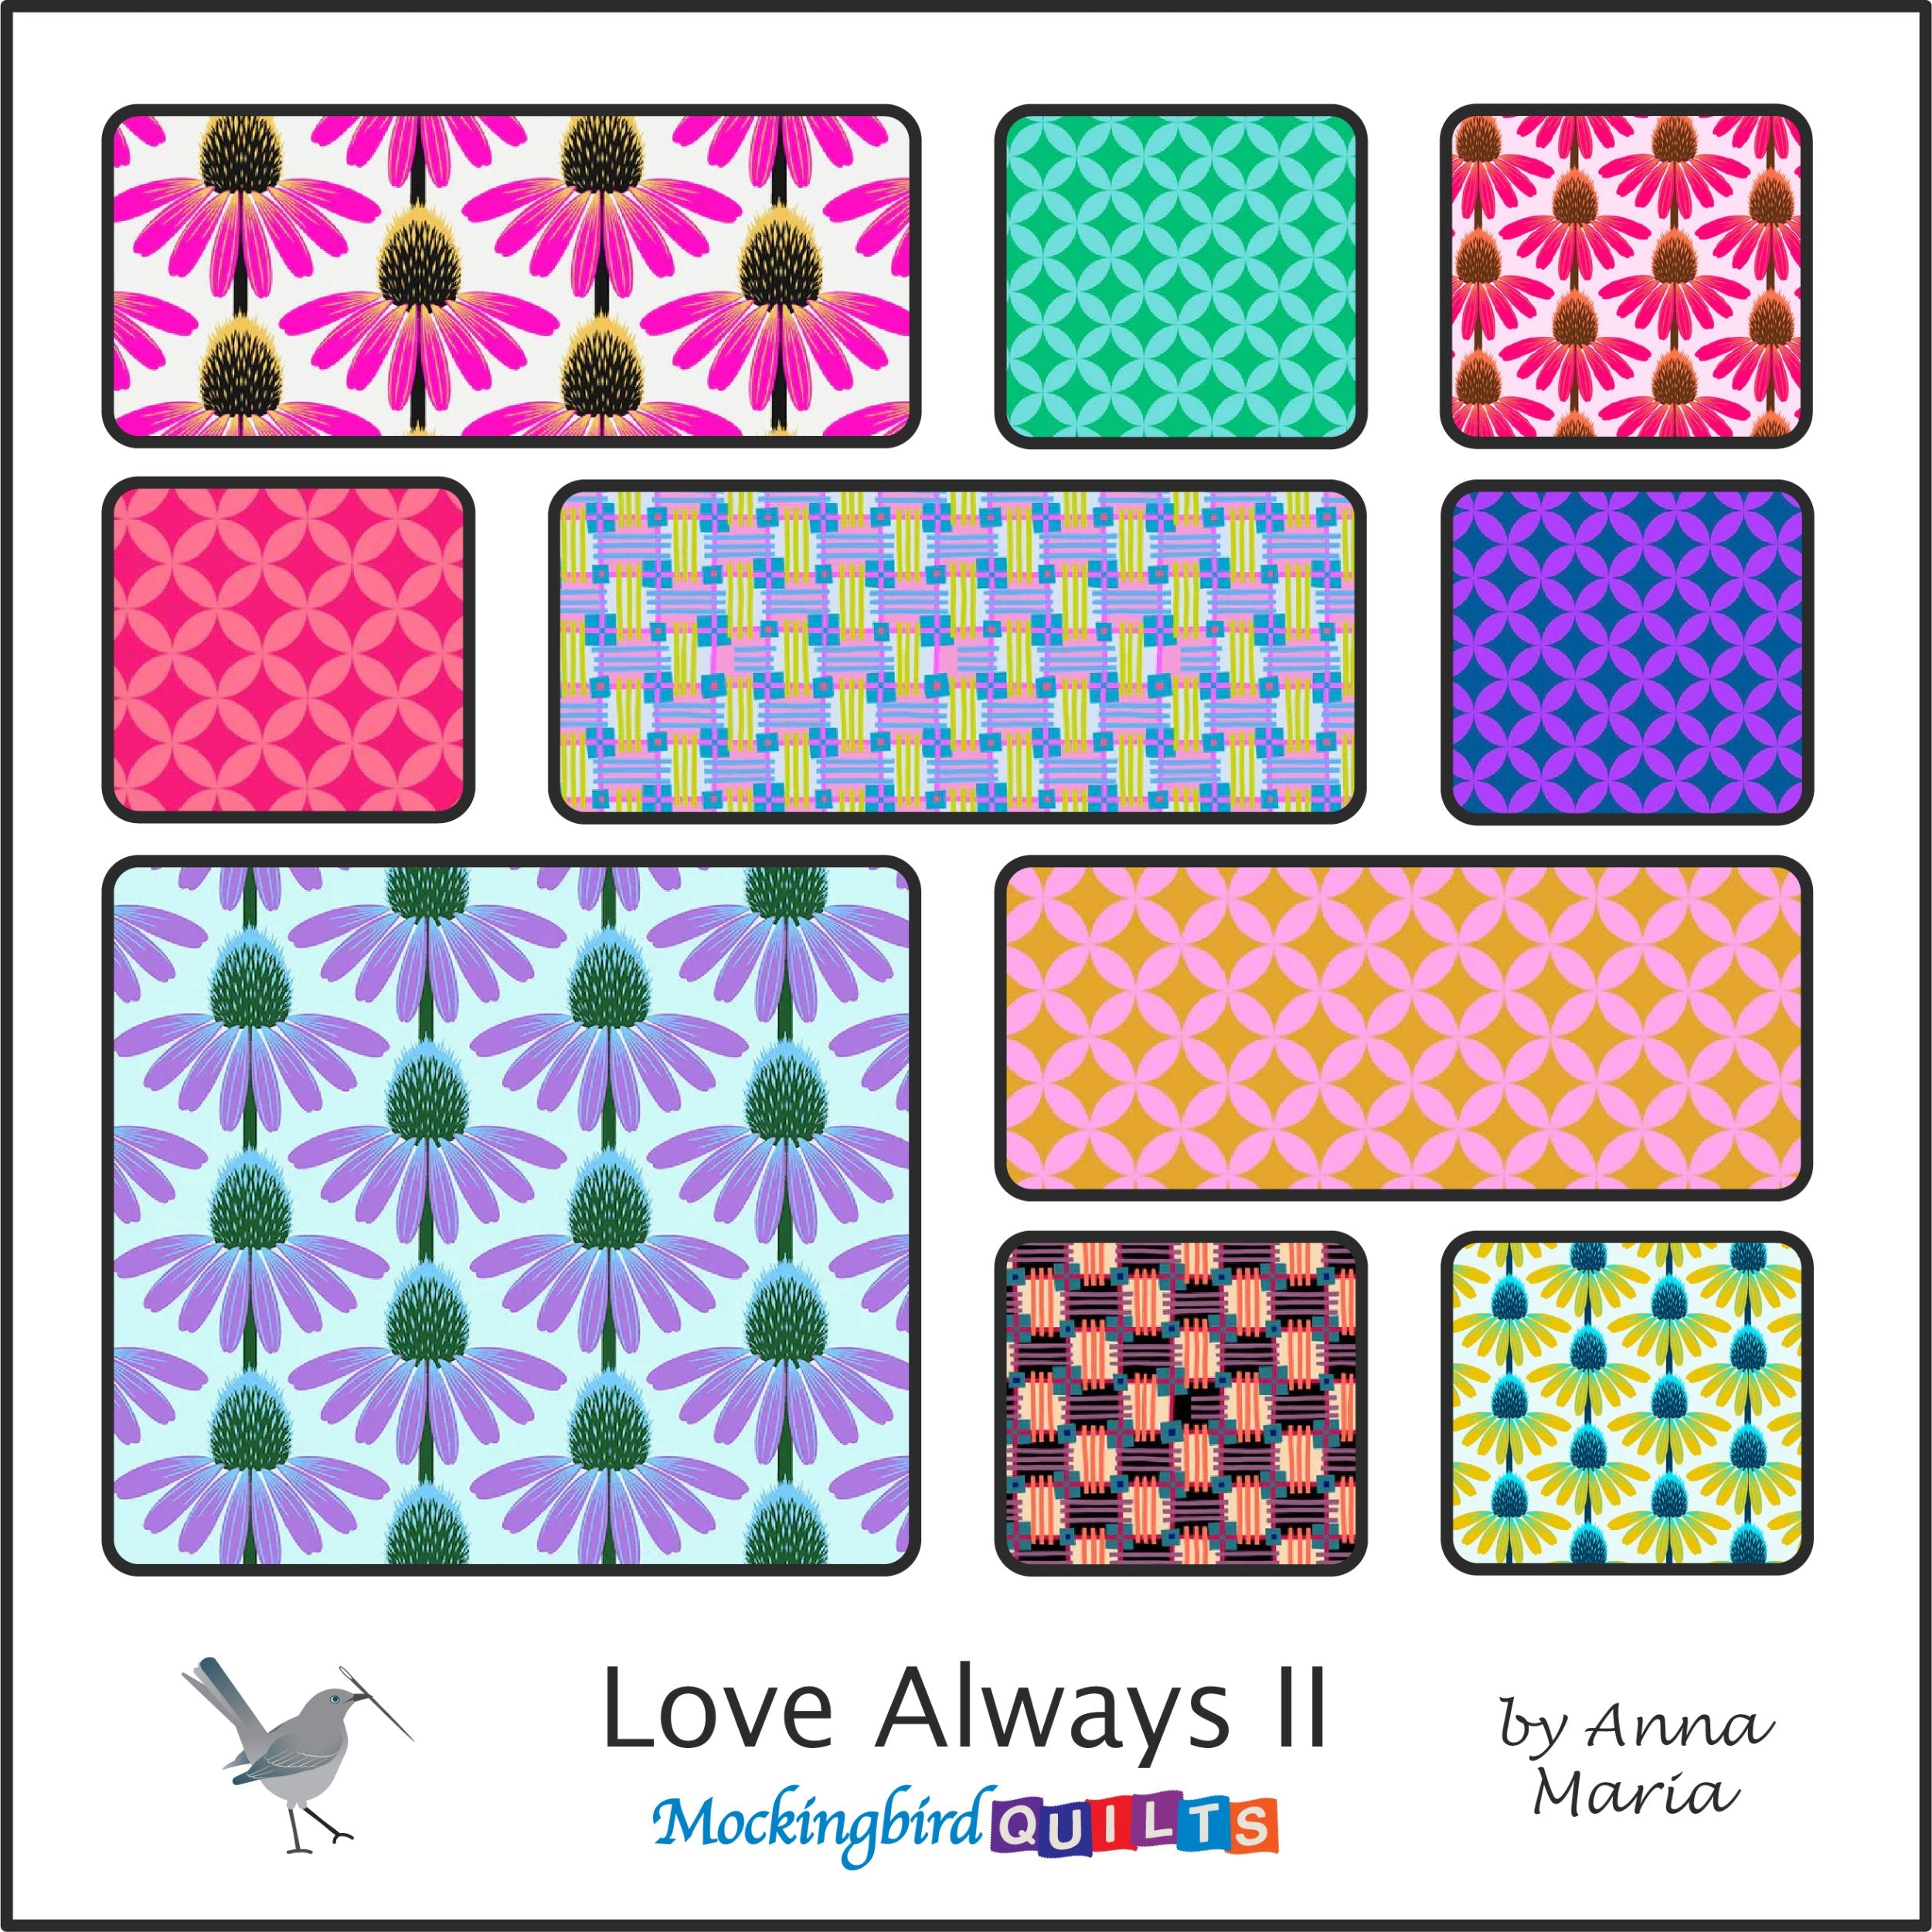 The image shows ten fabric swatches for the fabric line “Love Always II” by Anna Maria. The swatches are in bold, vibrant colors with equally bold patterns.